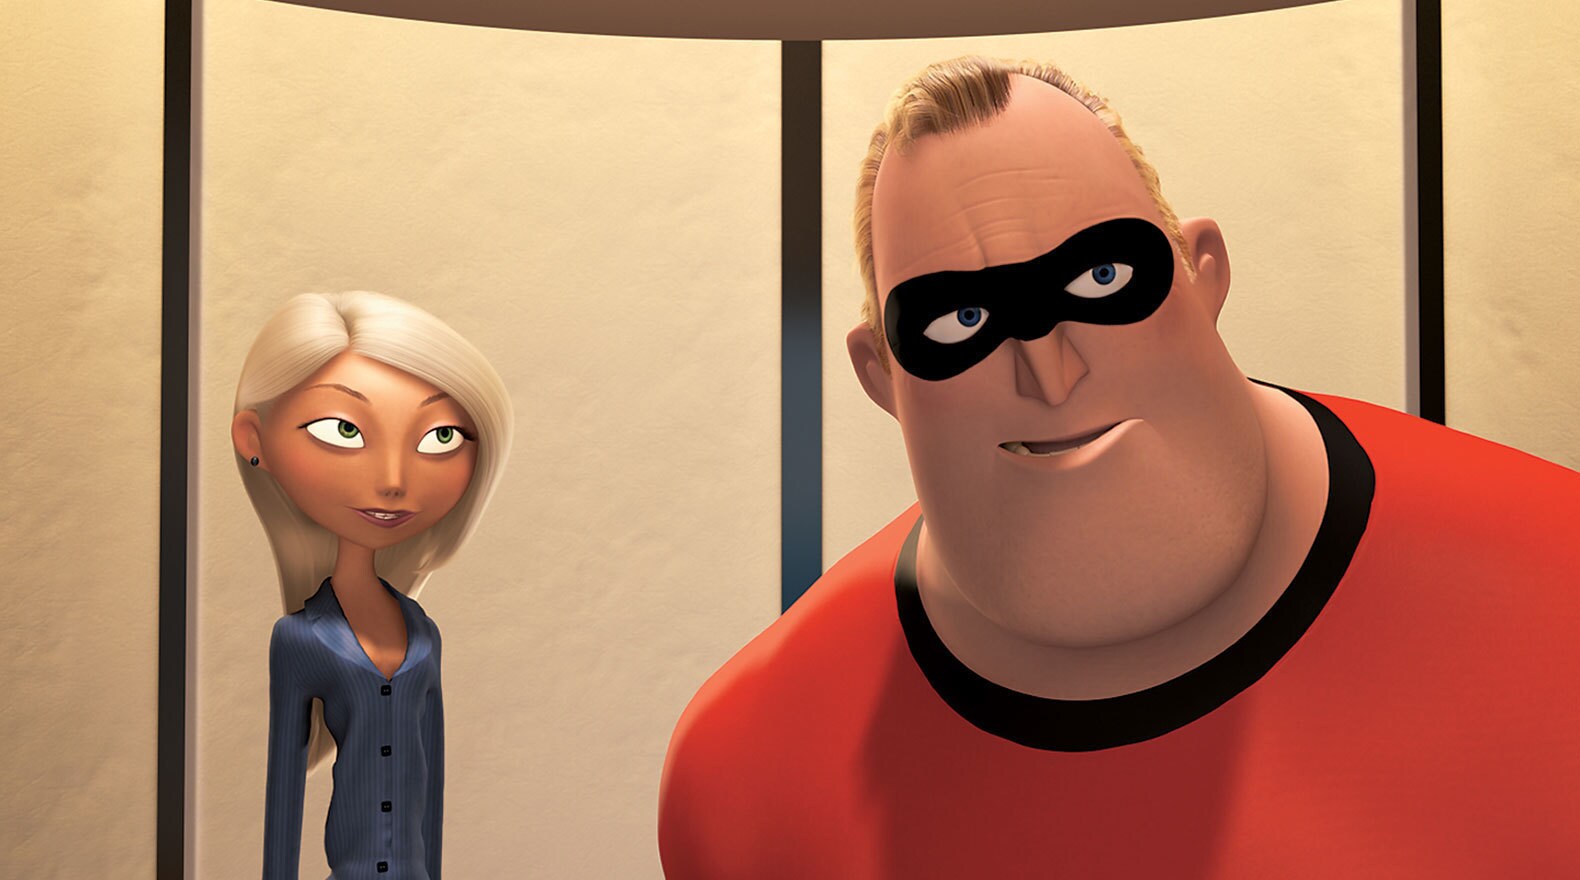 Mr. Incredible ready for his next assignment in "The Incredibles"